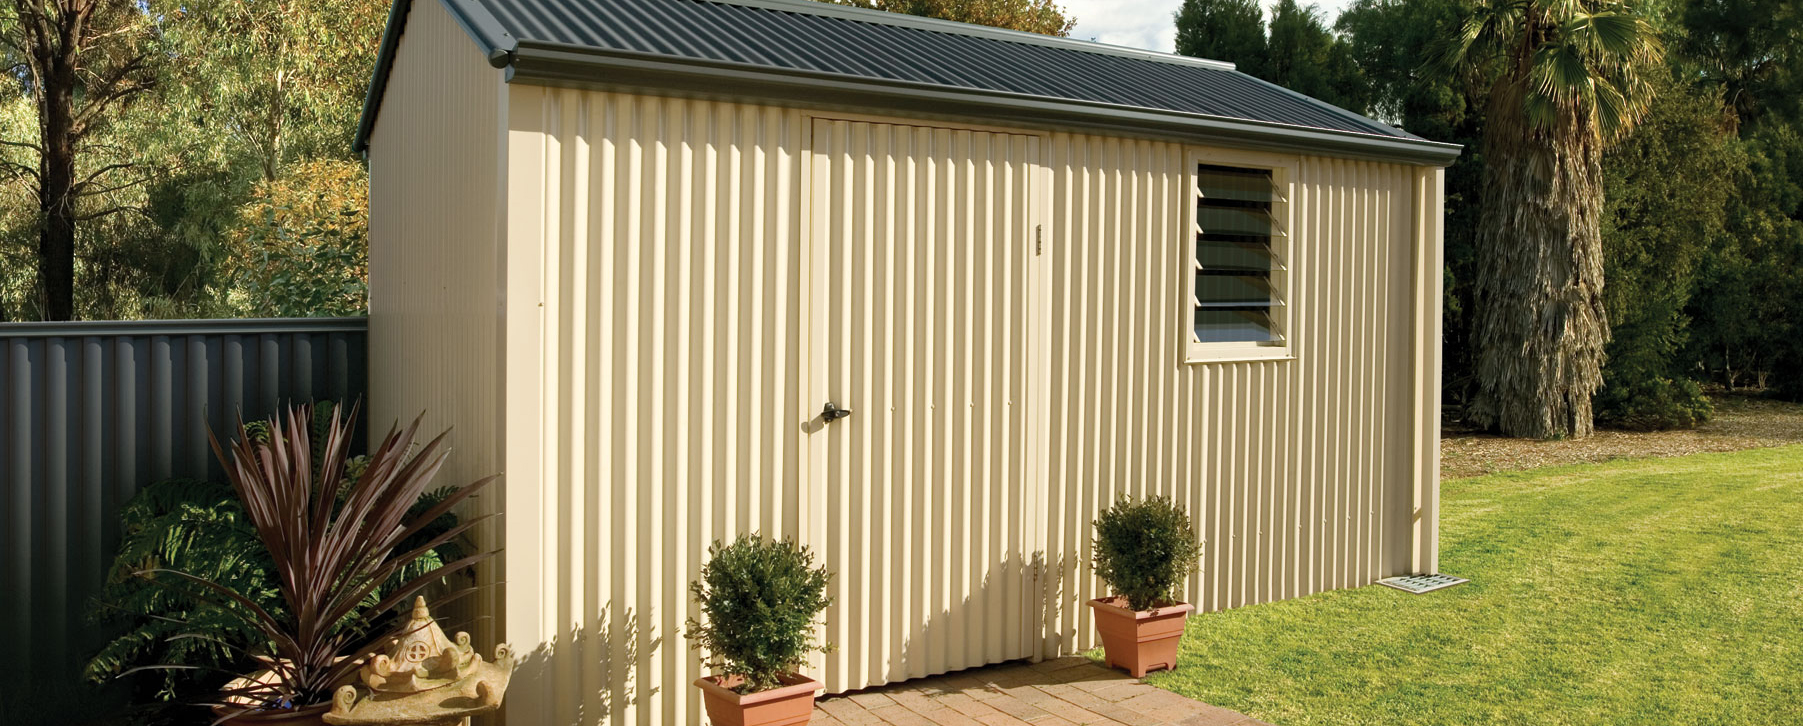 garden shed stratco